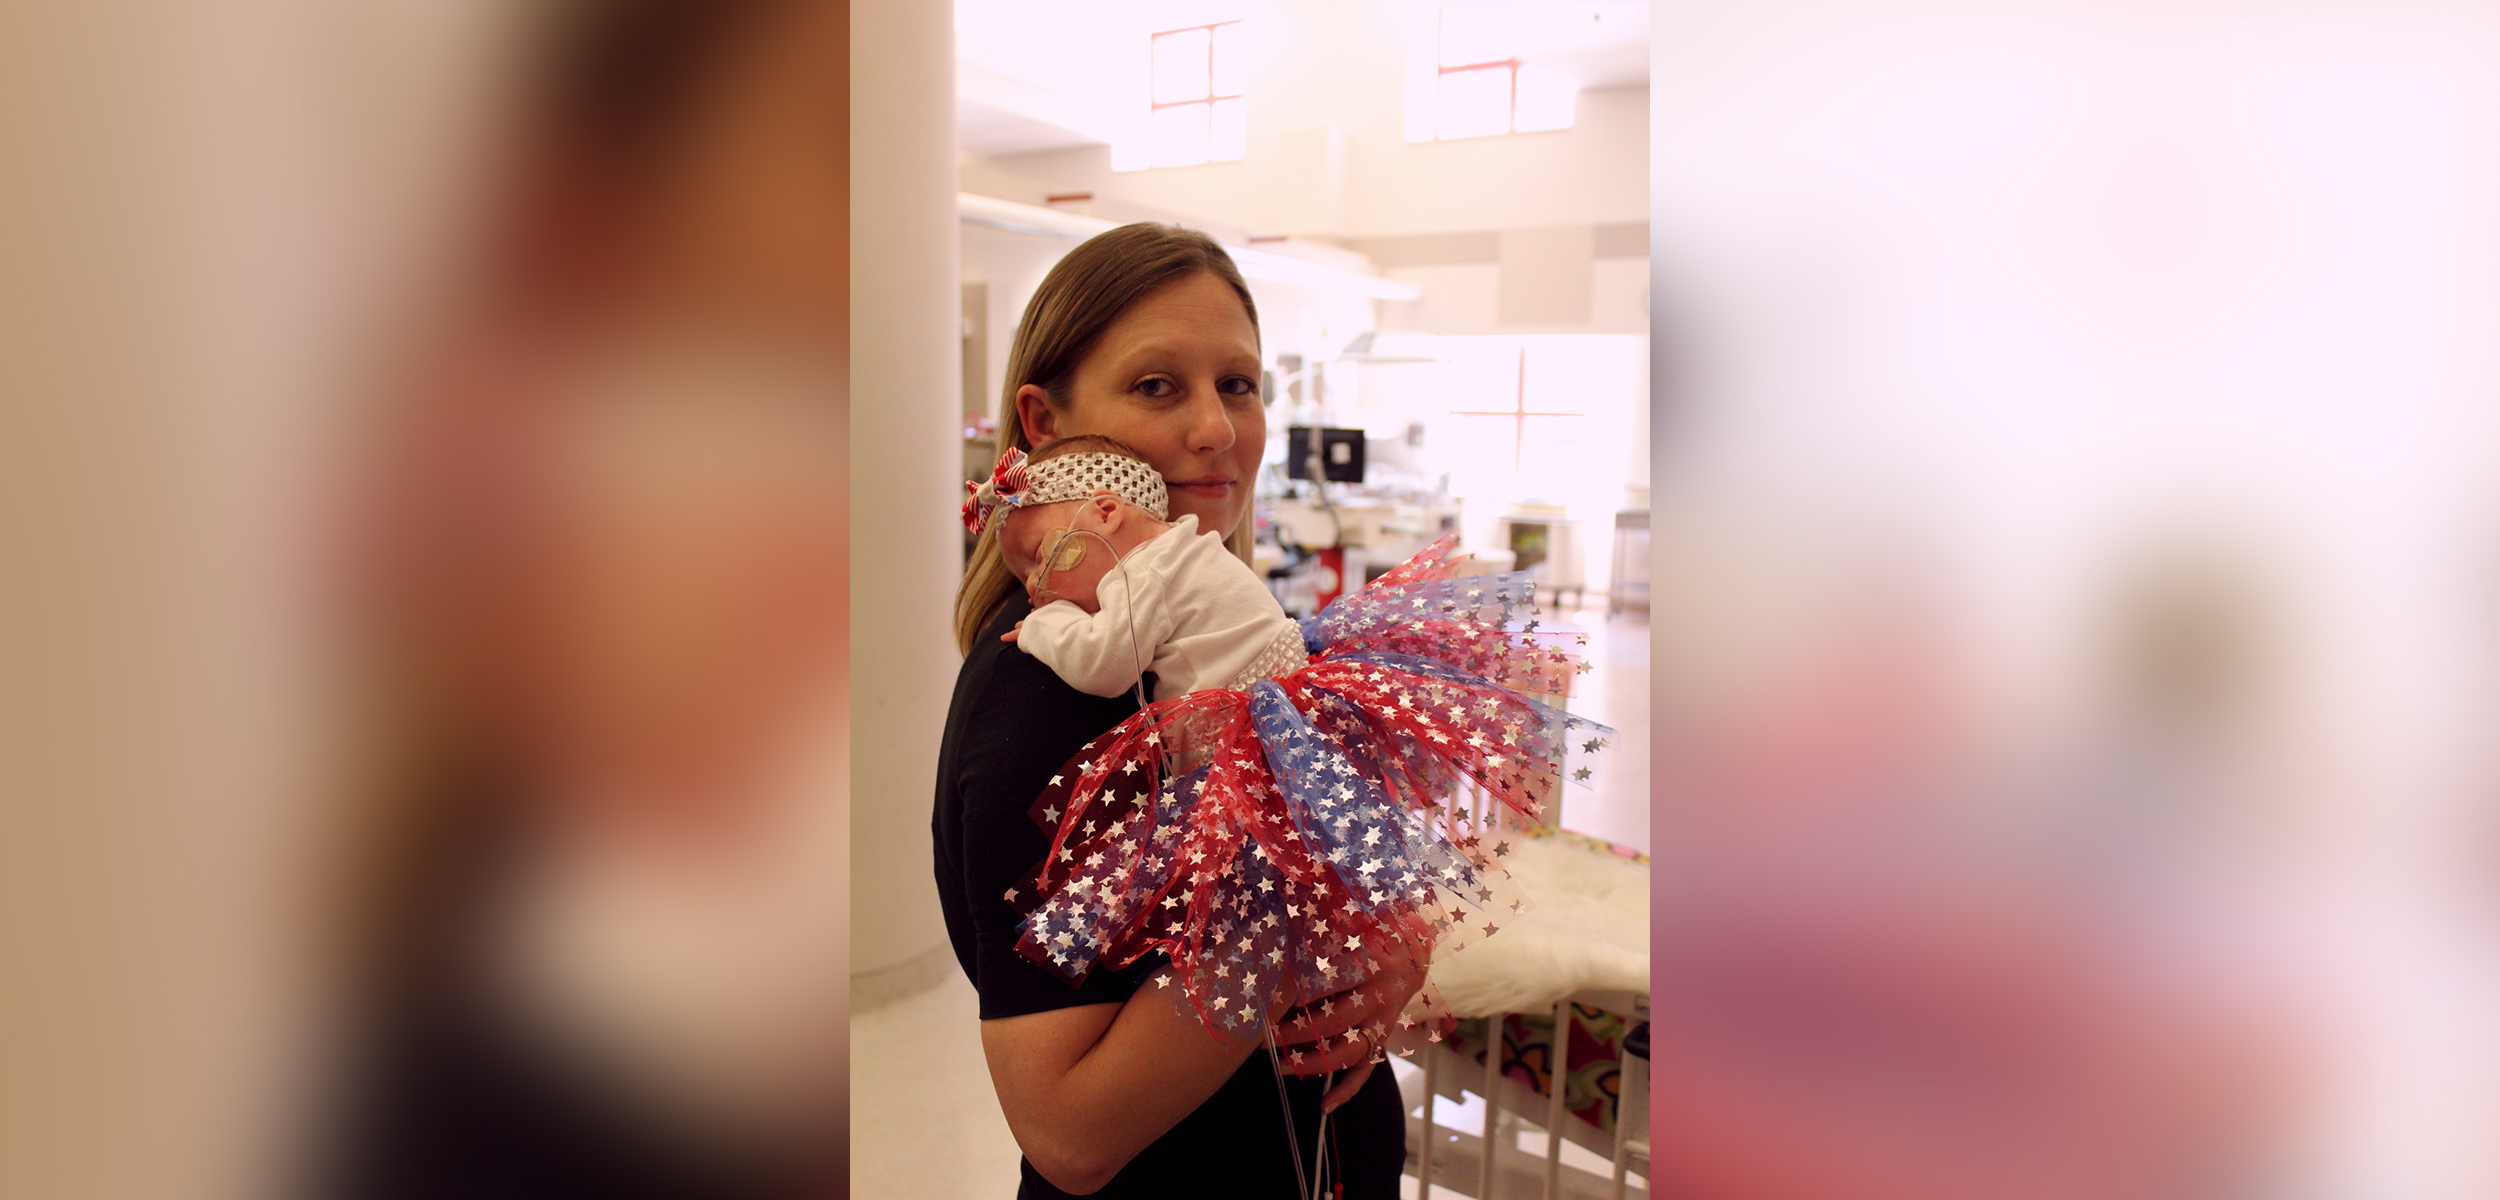 PHOTO: The preemies in the neonatal intensive care unit at the University of Cincinnati Medical Center wore red, white and blue to celebrate the 4th of July.  